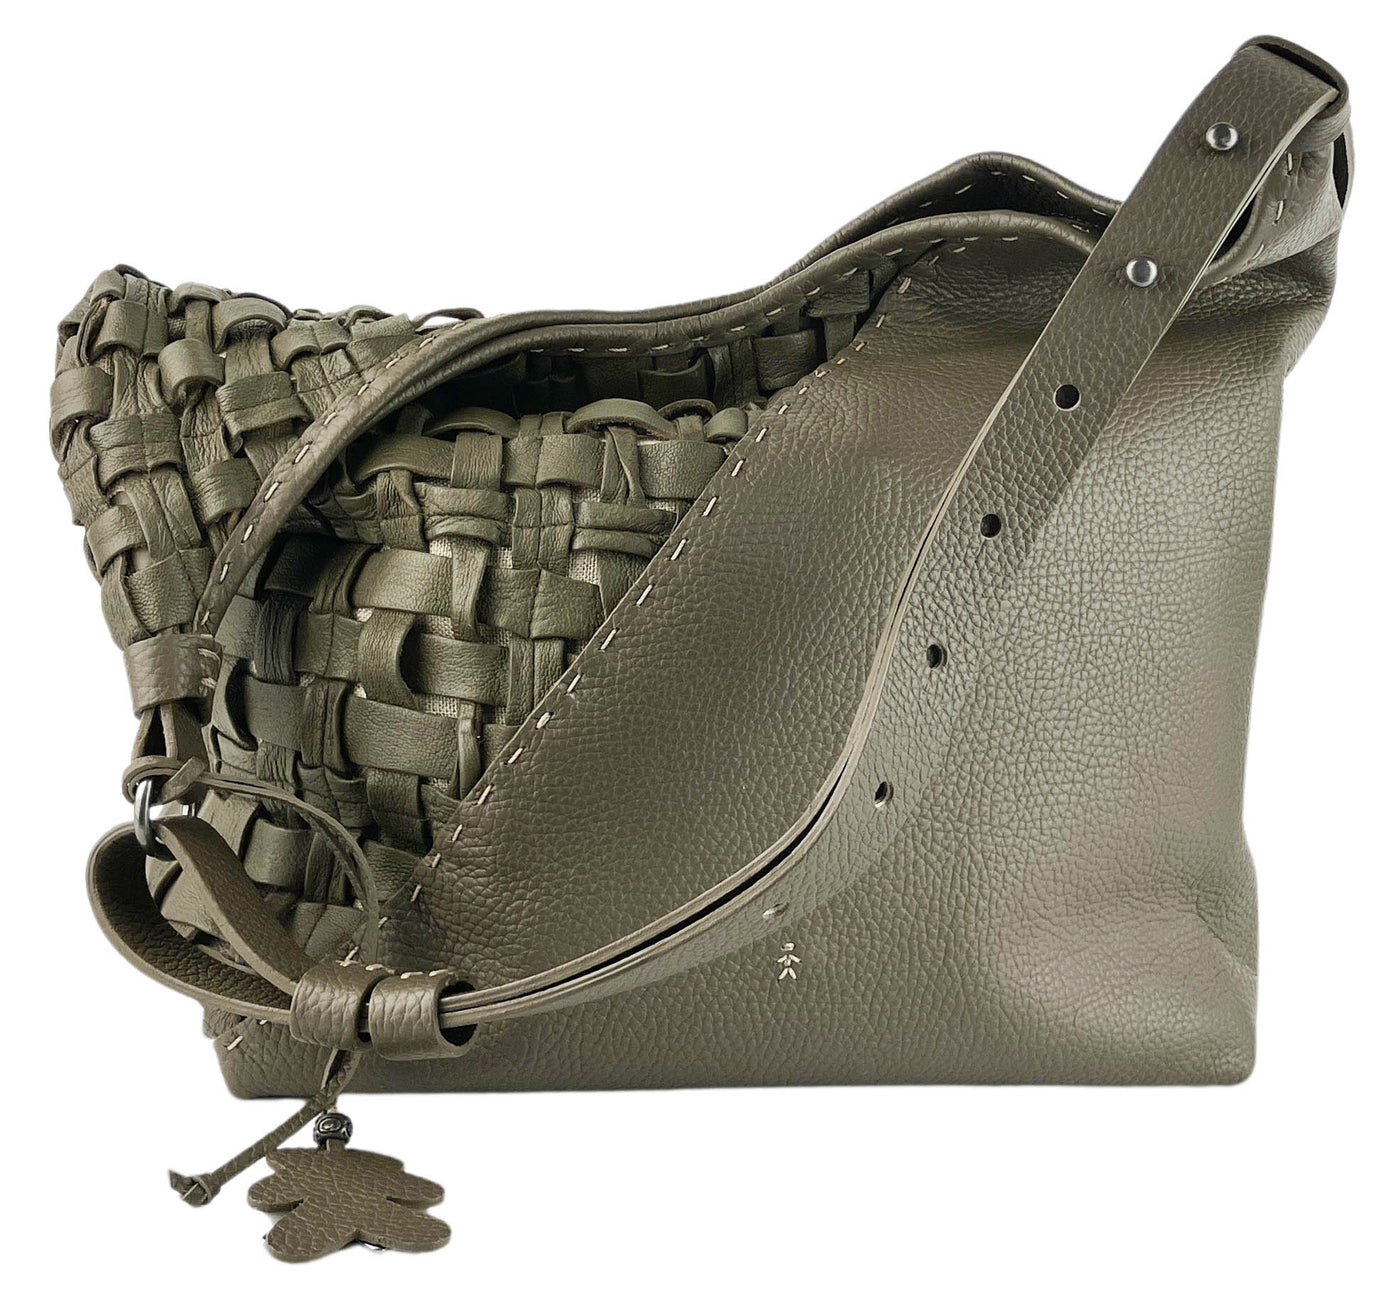 Henry Beguelin Bea Pocket Intreccio Cesta in Olive Green - Discounts on Henry Beguelin at UAL